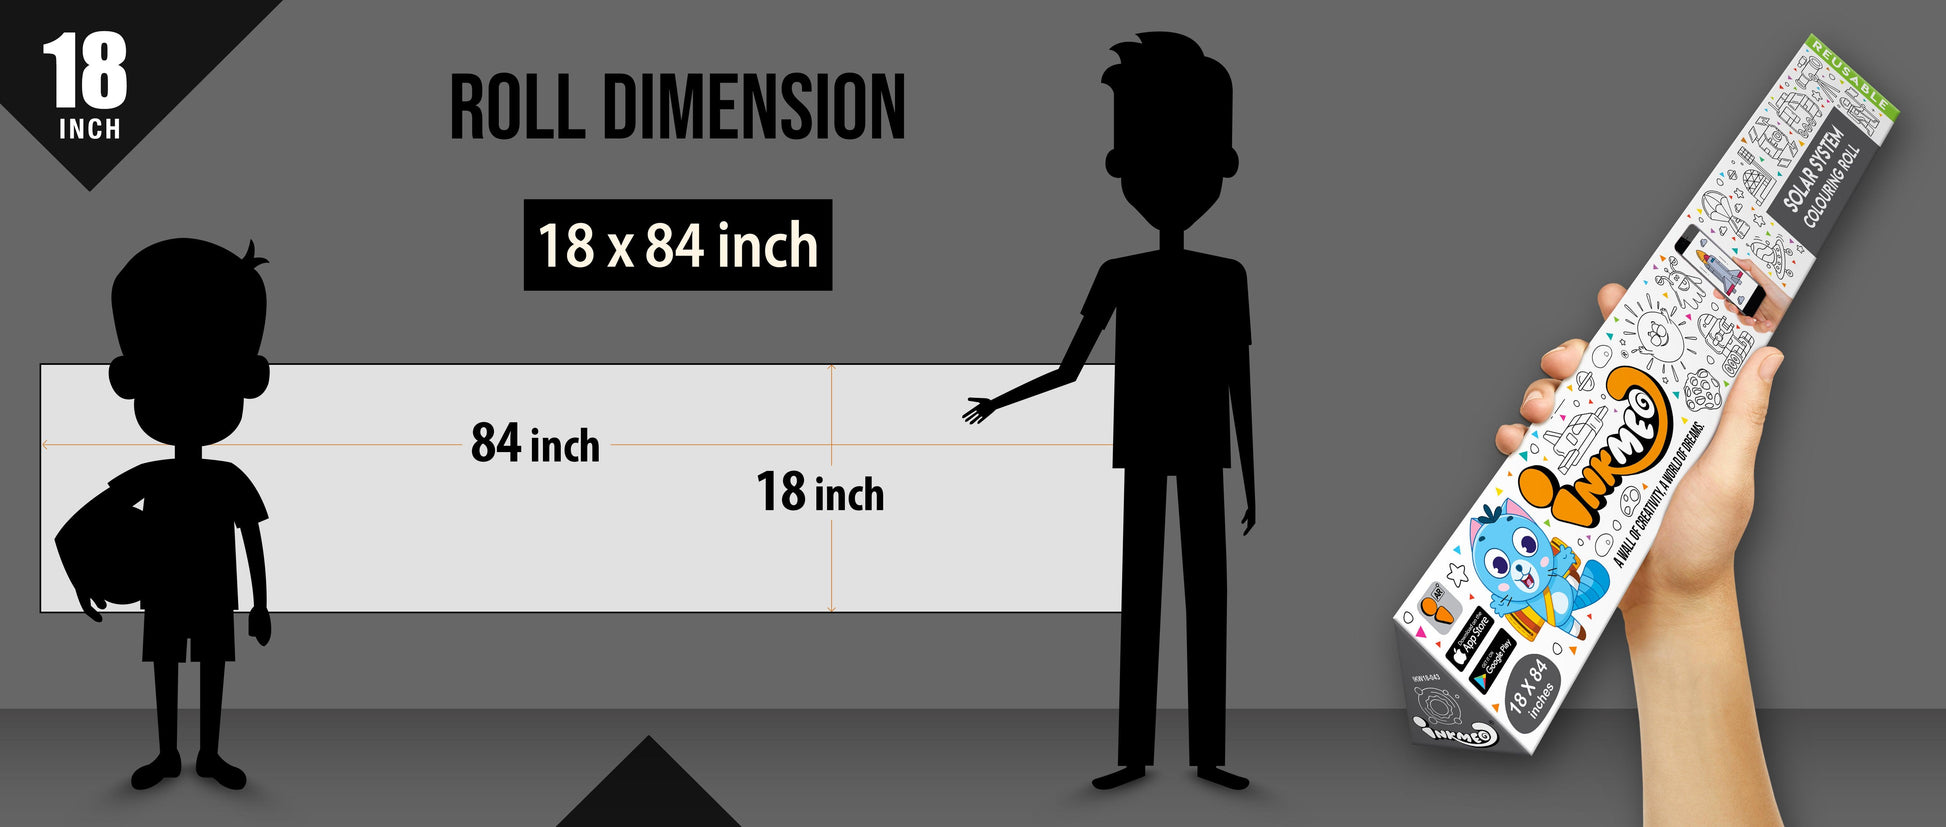 The image shows a black background with a ruler indicating child and adult height on an 18*84 inch paper roll dimension.